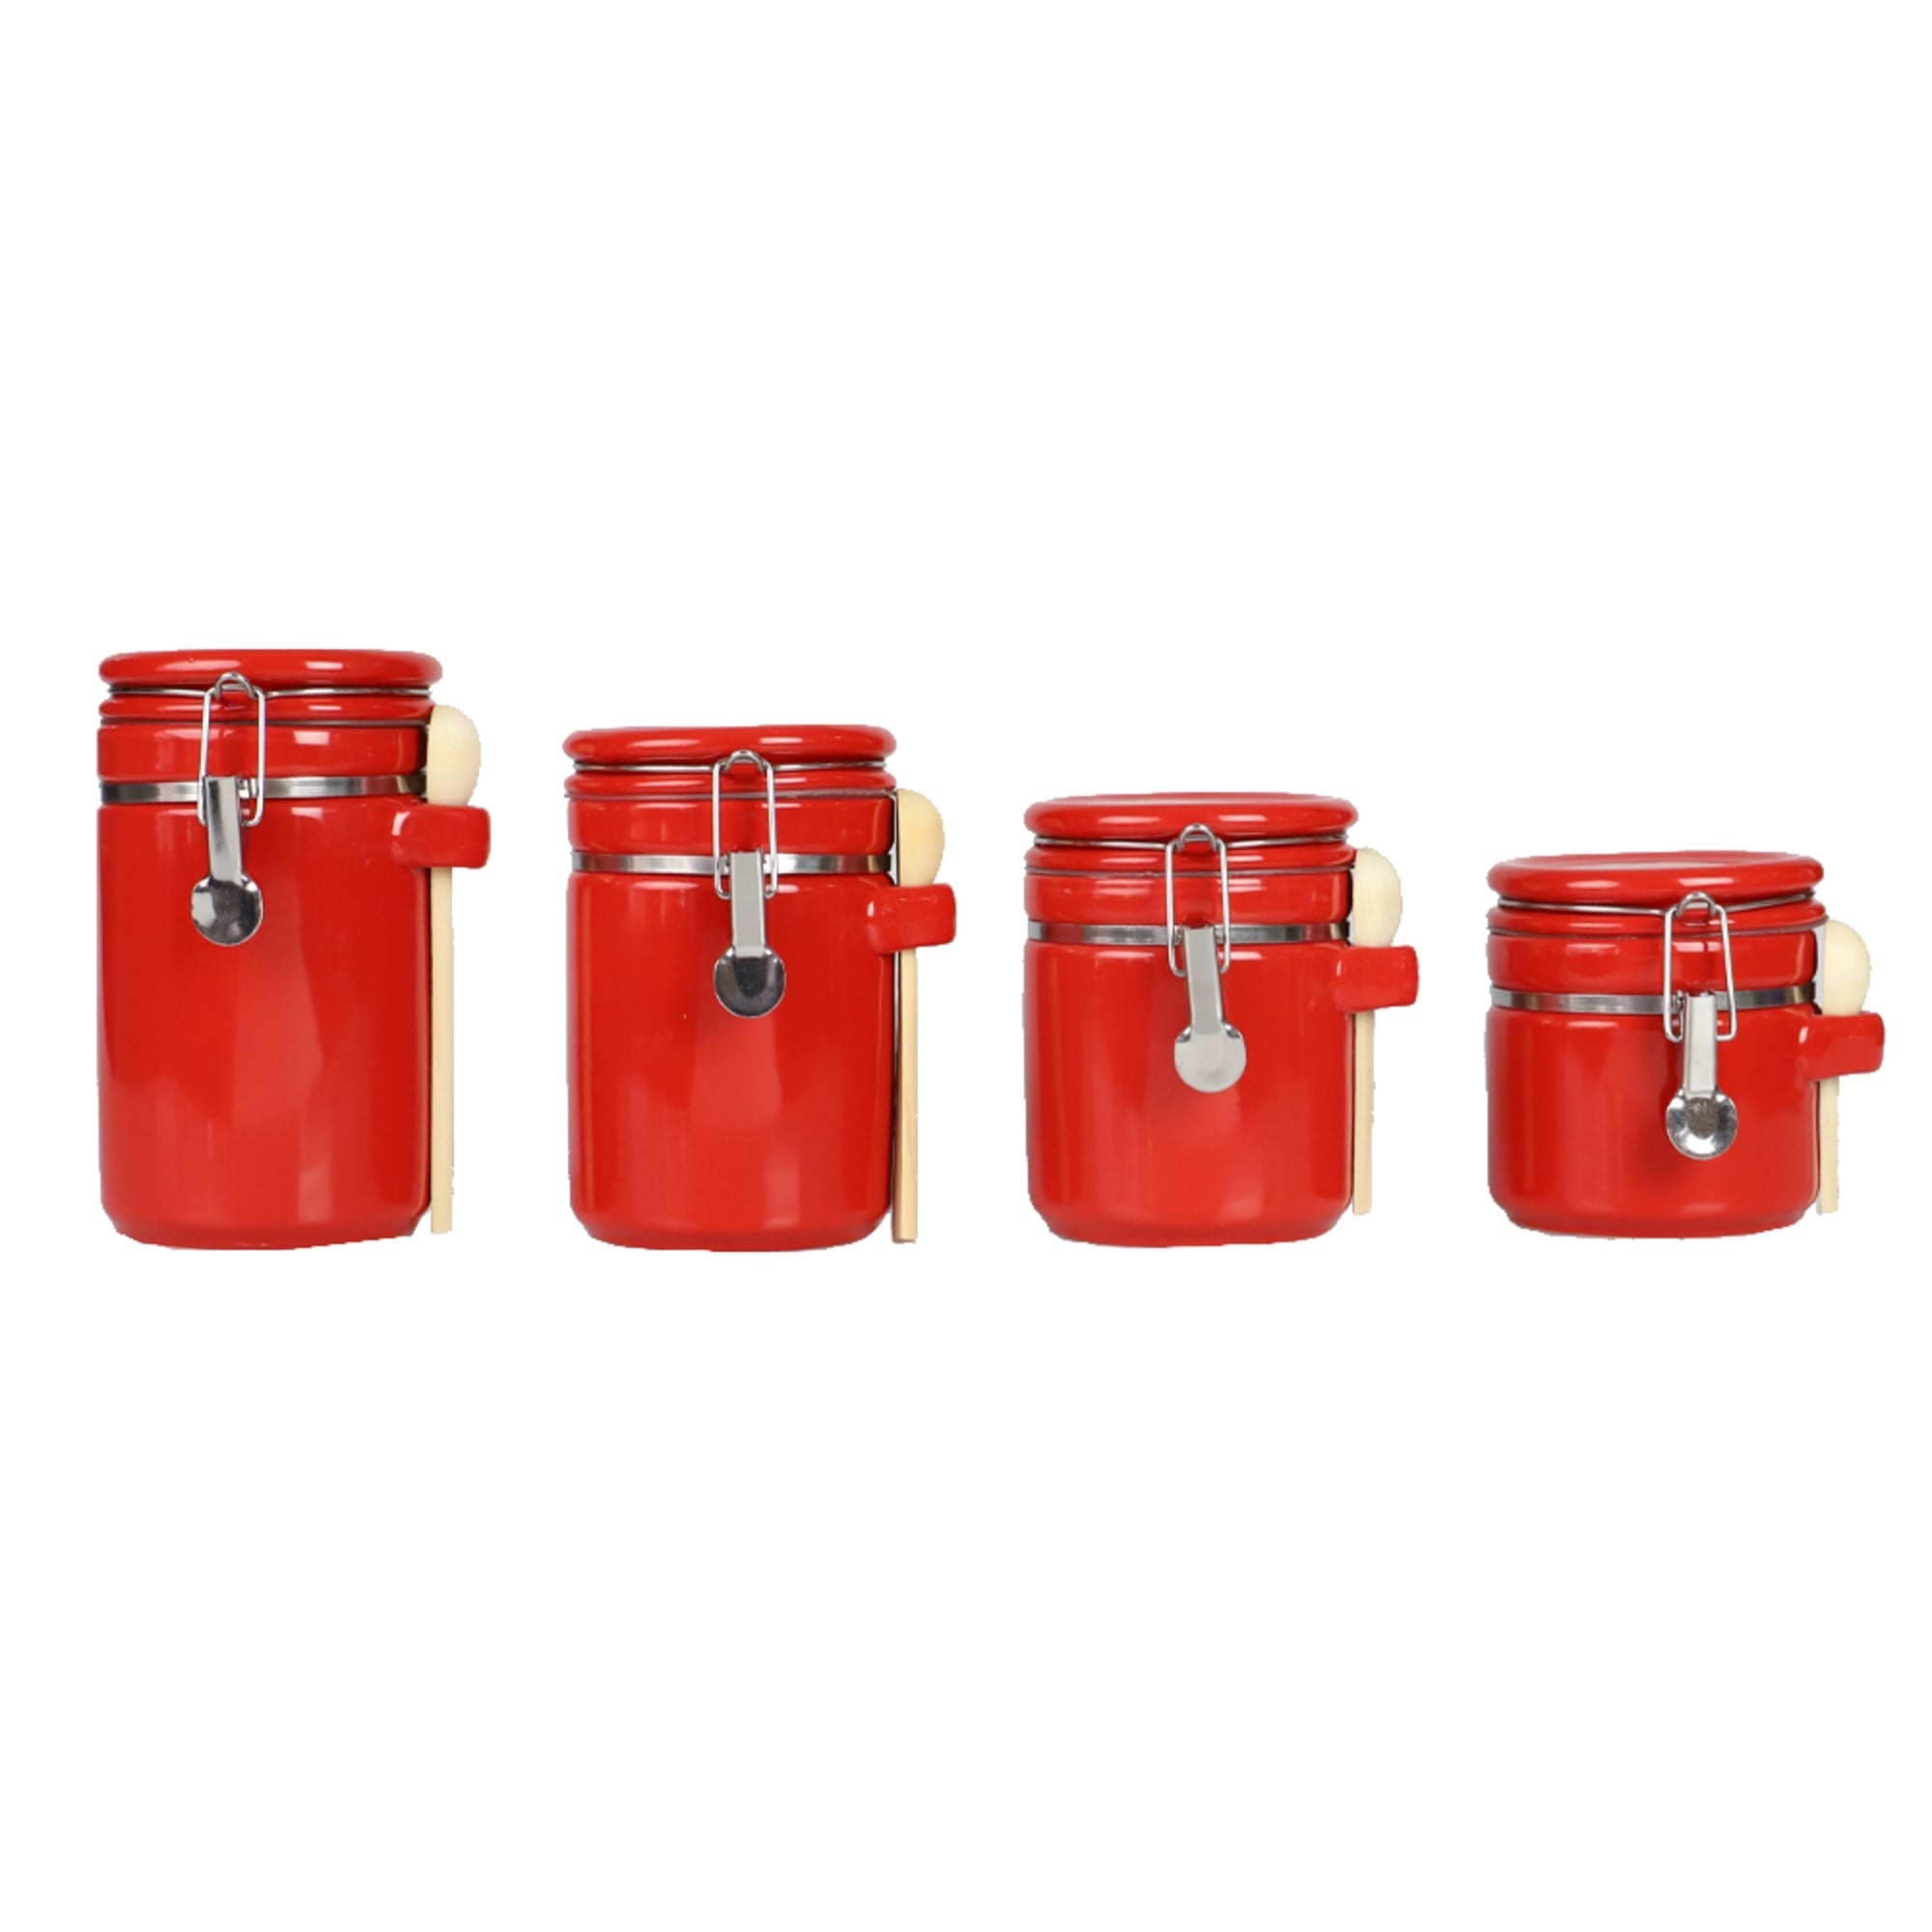 Home Basics 4 Piece Ceramic Canister Set with Wooden Spoons, Red $20.00 EACH, CASE PACK OF 2